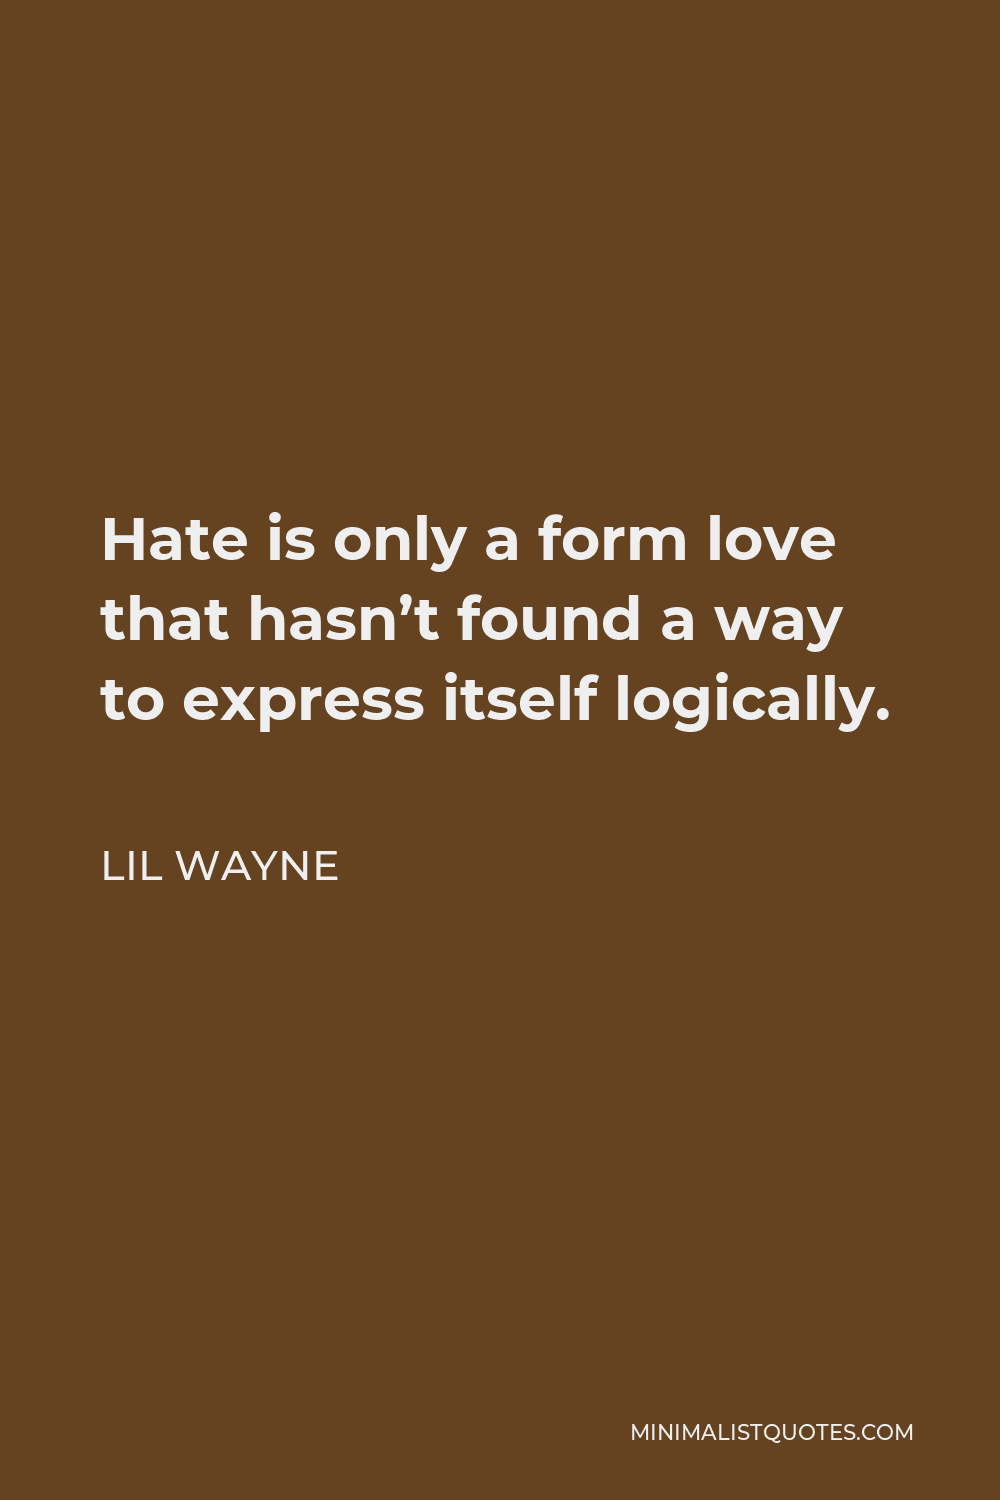 Lil Wayne Quote - Hate is only a form love that hasn’t found a way to express itself logically.